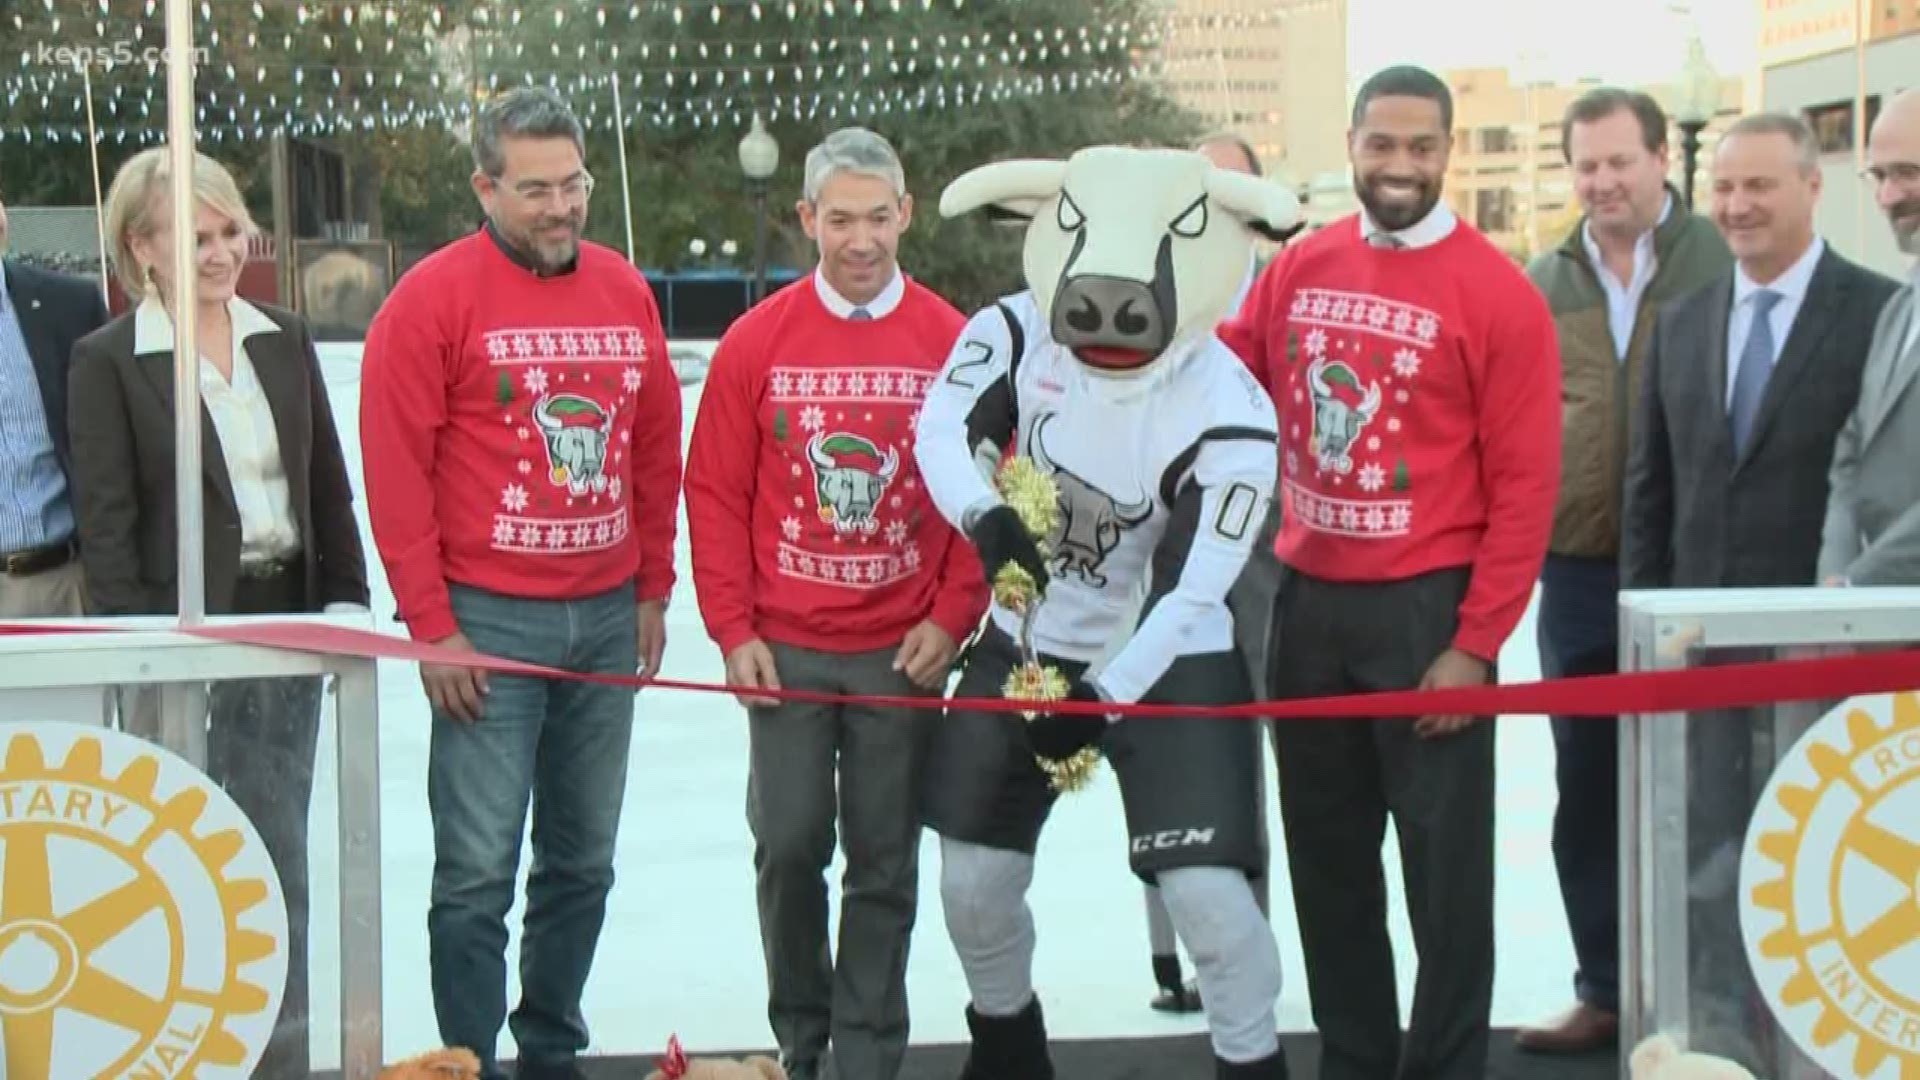 During the soft opening over the weekend, 3,000 people tested out the new ice rink at Travis Park.